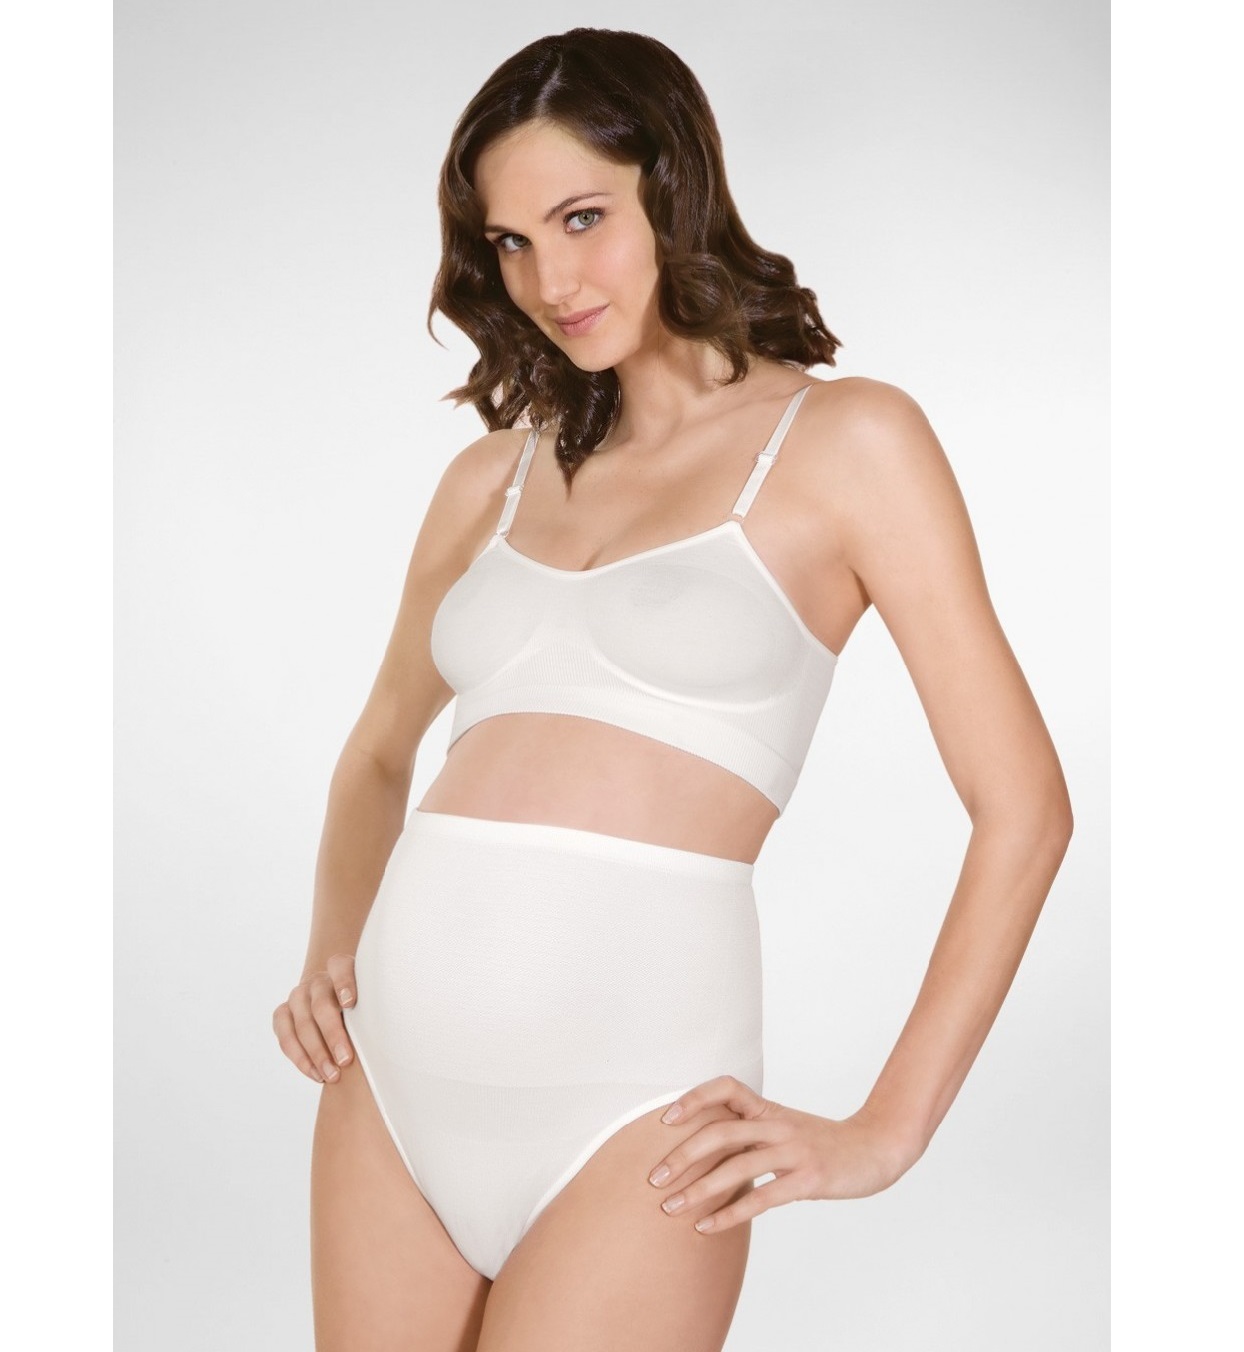 Maternity, Panty Girdle, Slimming After Pregnancy, W-5200